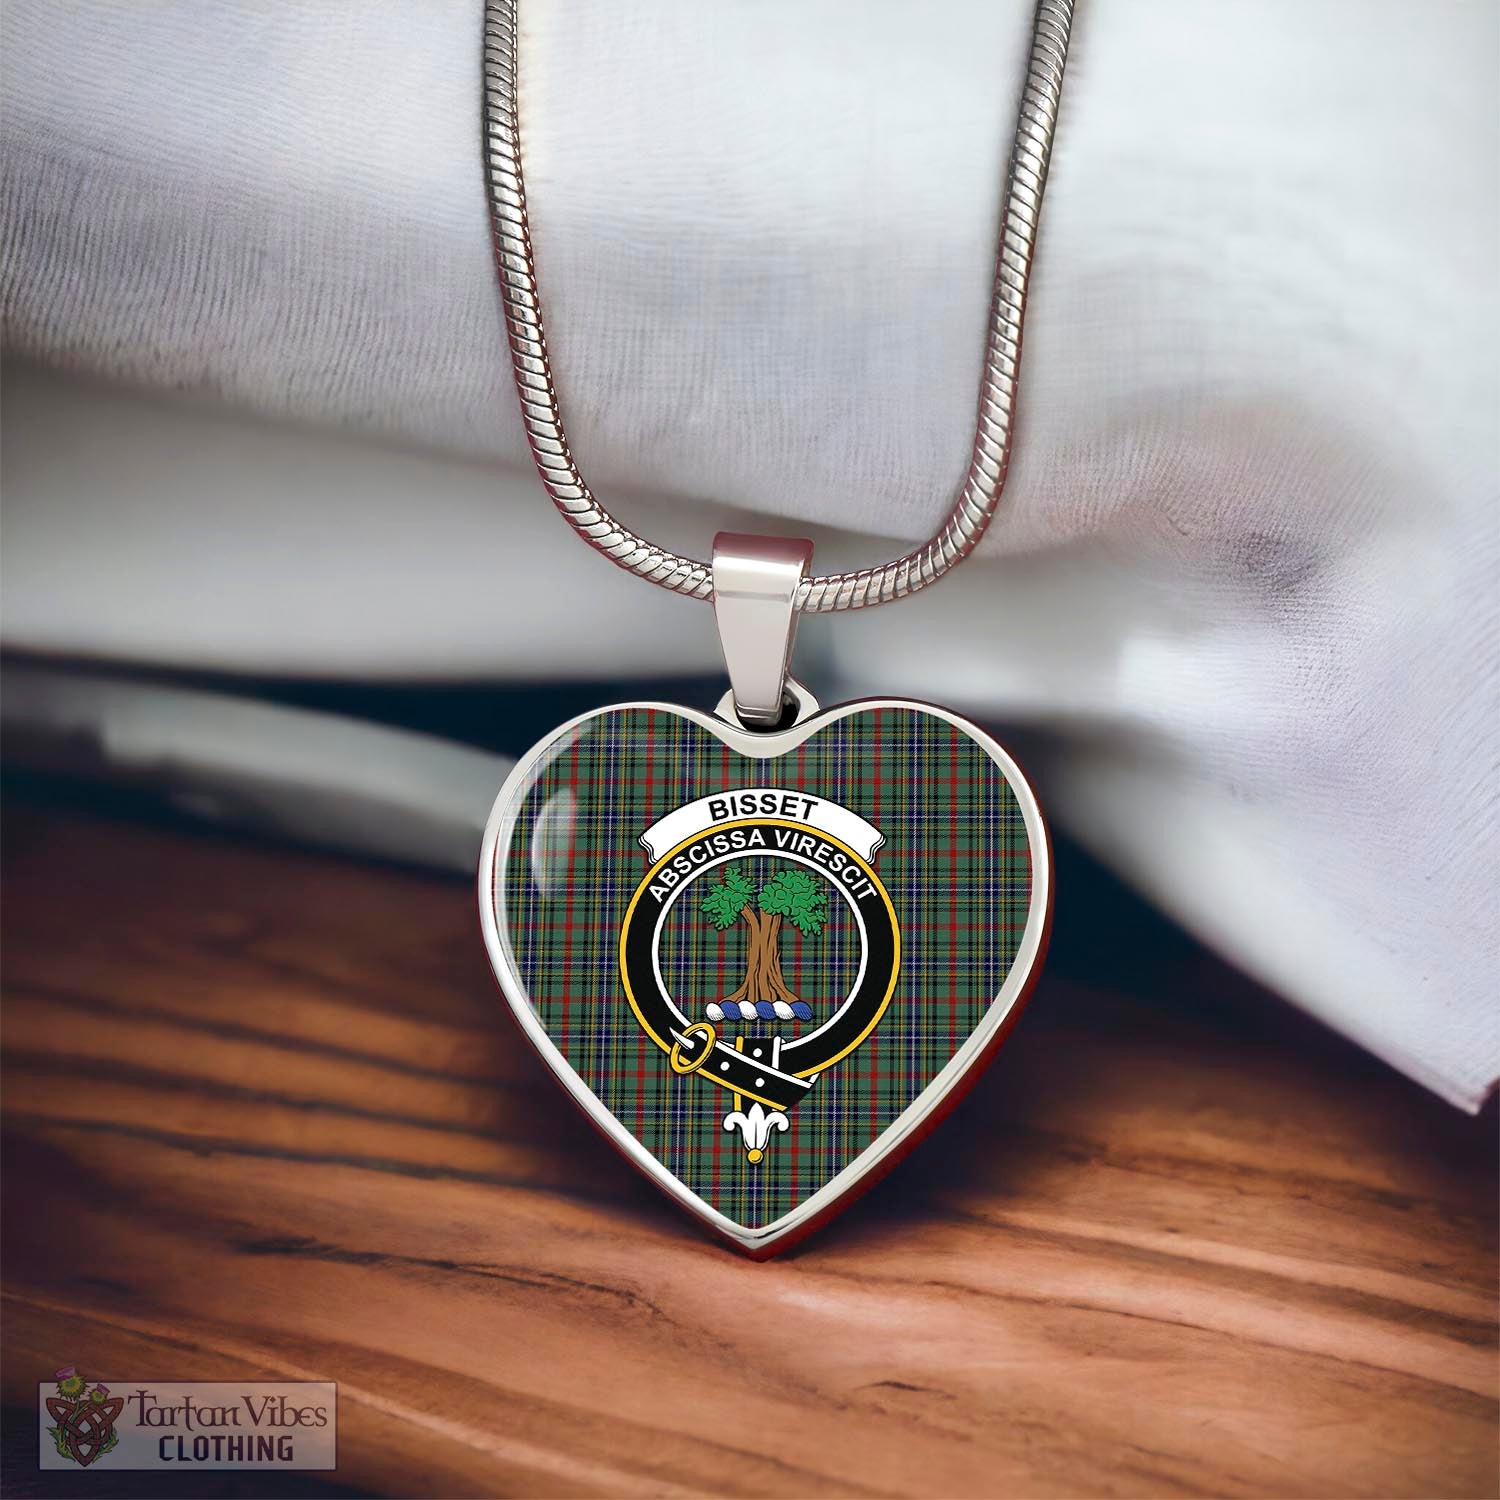 Tartan Vibes Clothing Bisset Tartan Heart Necklace with Family Crest